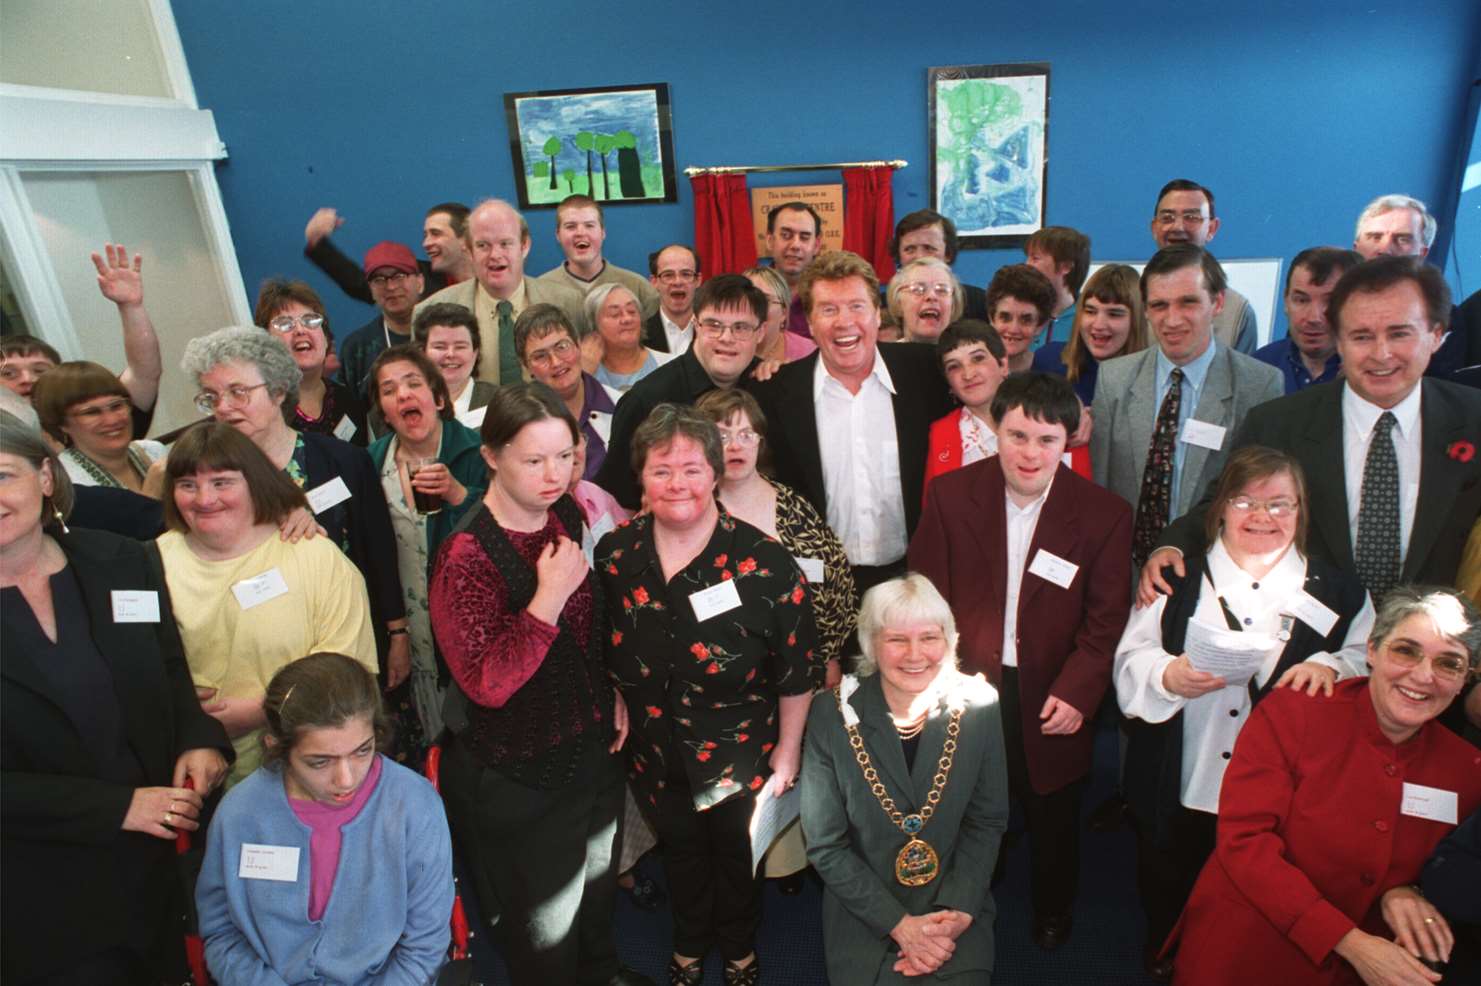 Michael Crawford at the opening of The Crawford Centre in Sheerness. Anne Dear is pictured to the right of the actor.